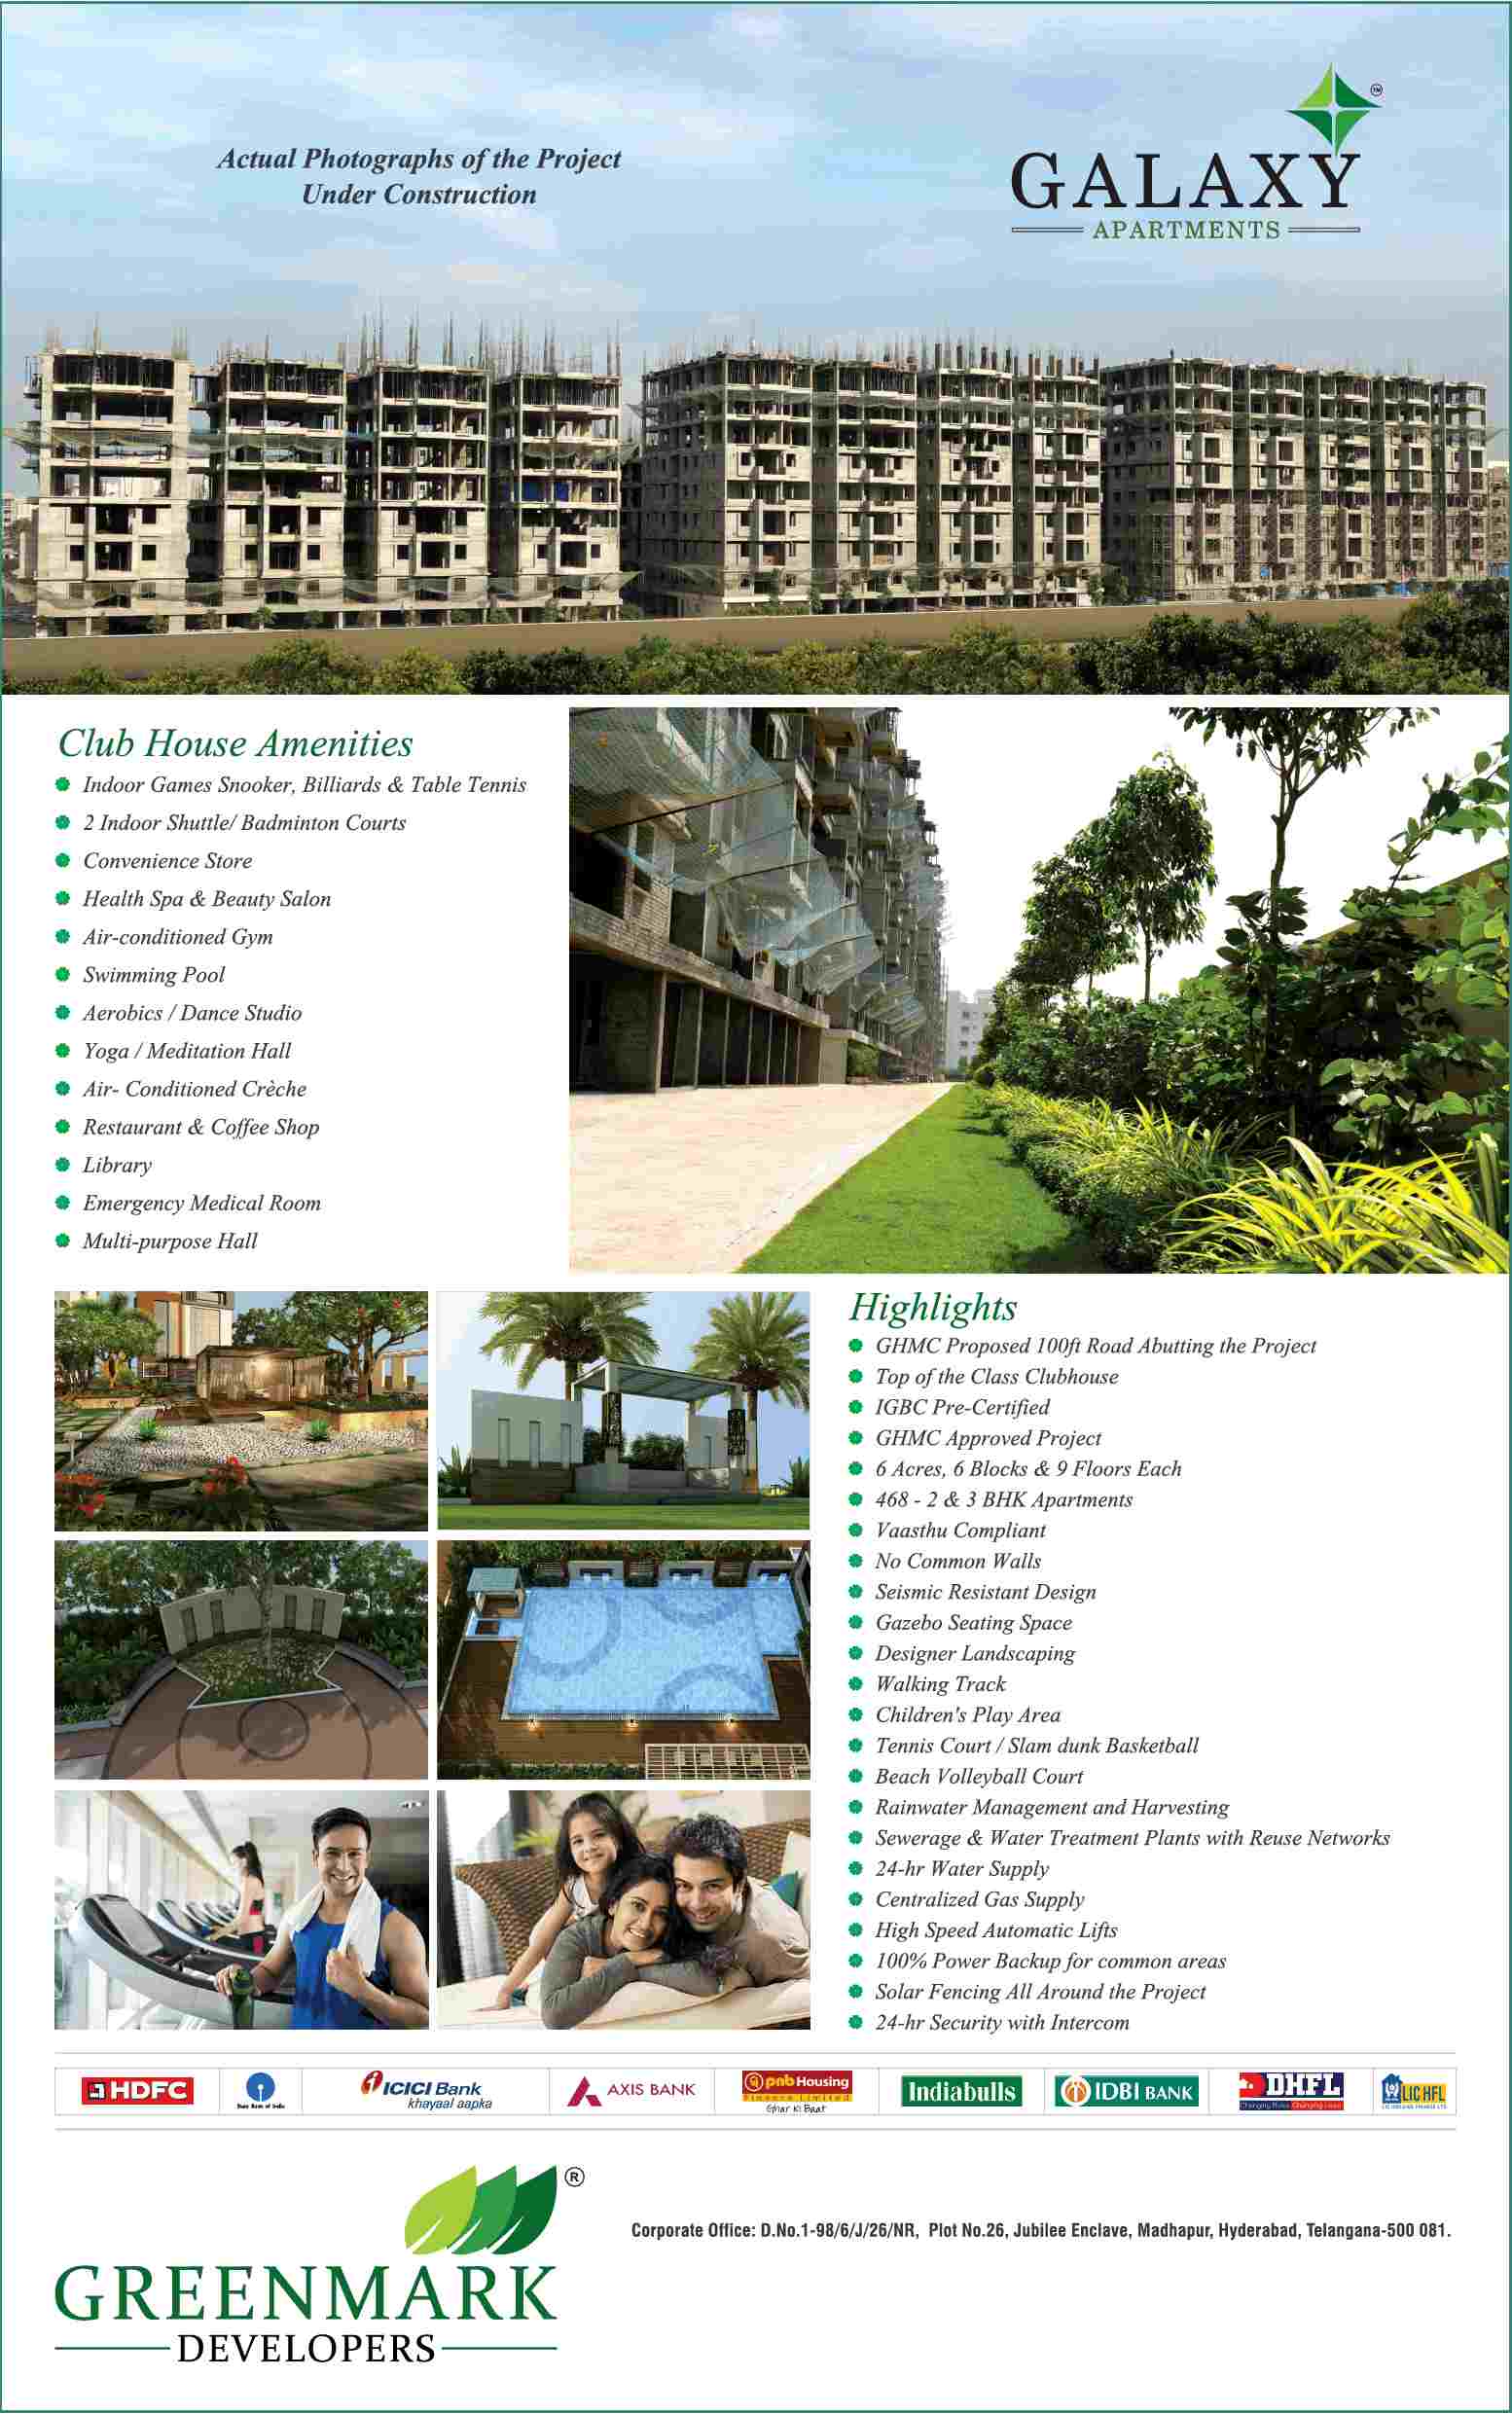 Reside at Greenmark Galaxy and enjoy the clubhouse amenities in Hyderabad